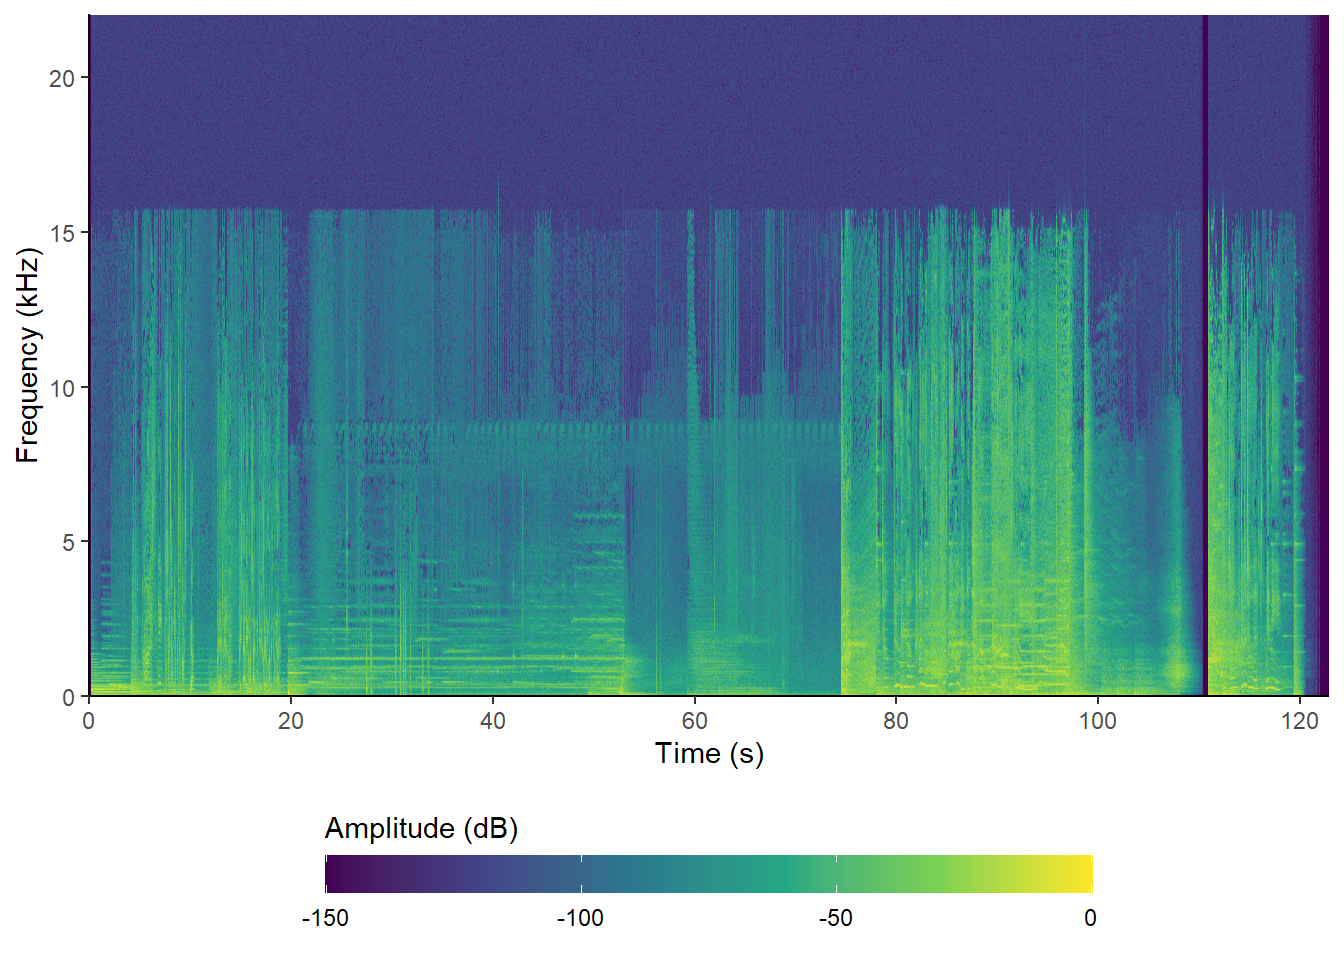 The spectrogram of the soundtrack of the trailer for *Insidious: Chapter 3* using `seewave::ggspectro()`.